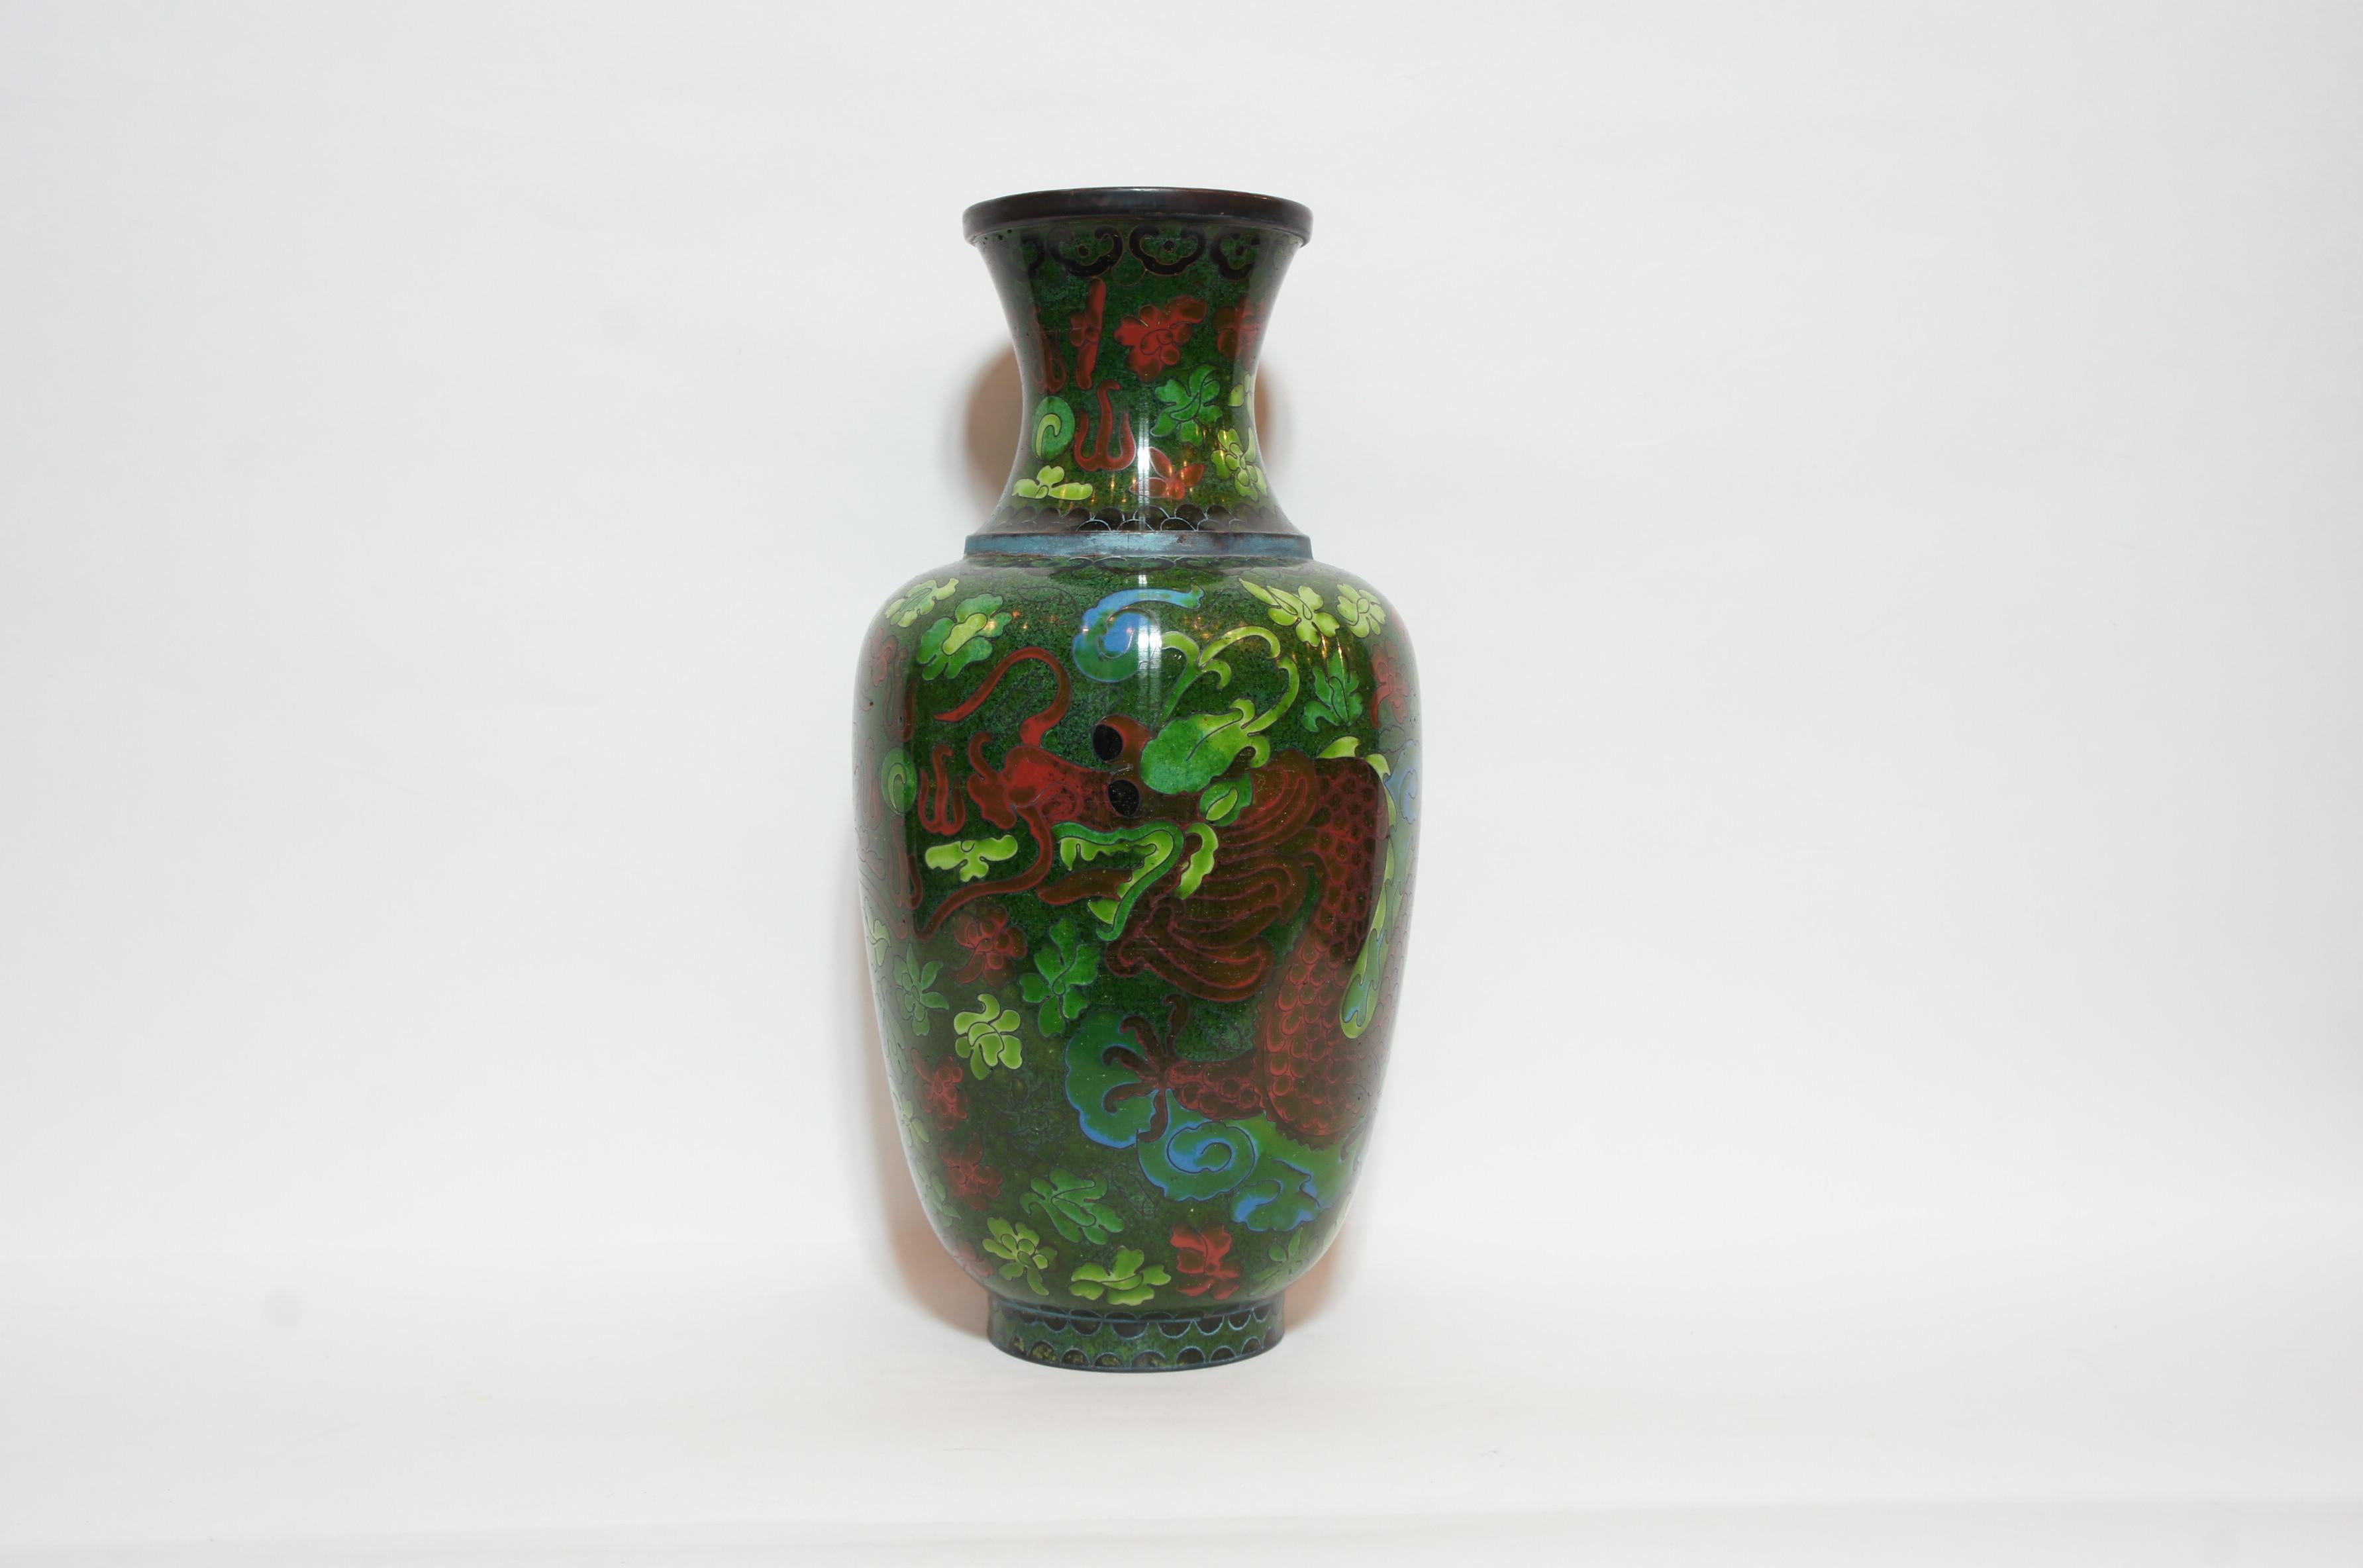 This is a green and red flower vase made in Japan around 1860 in Edo era. It is designed with a dragon and flowers. 
This style made with copper is called Shippou in Japanese.
The cloisonné technique was mastered in China in the early 19th century